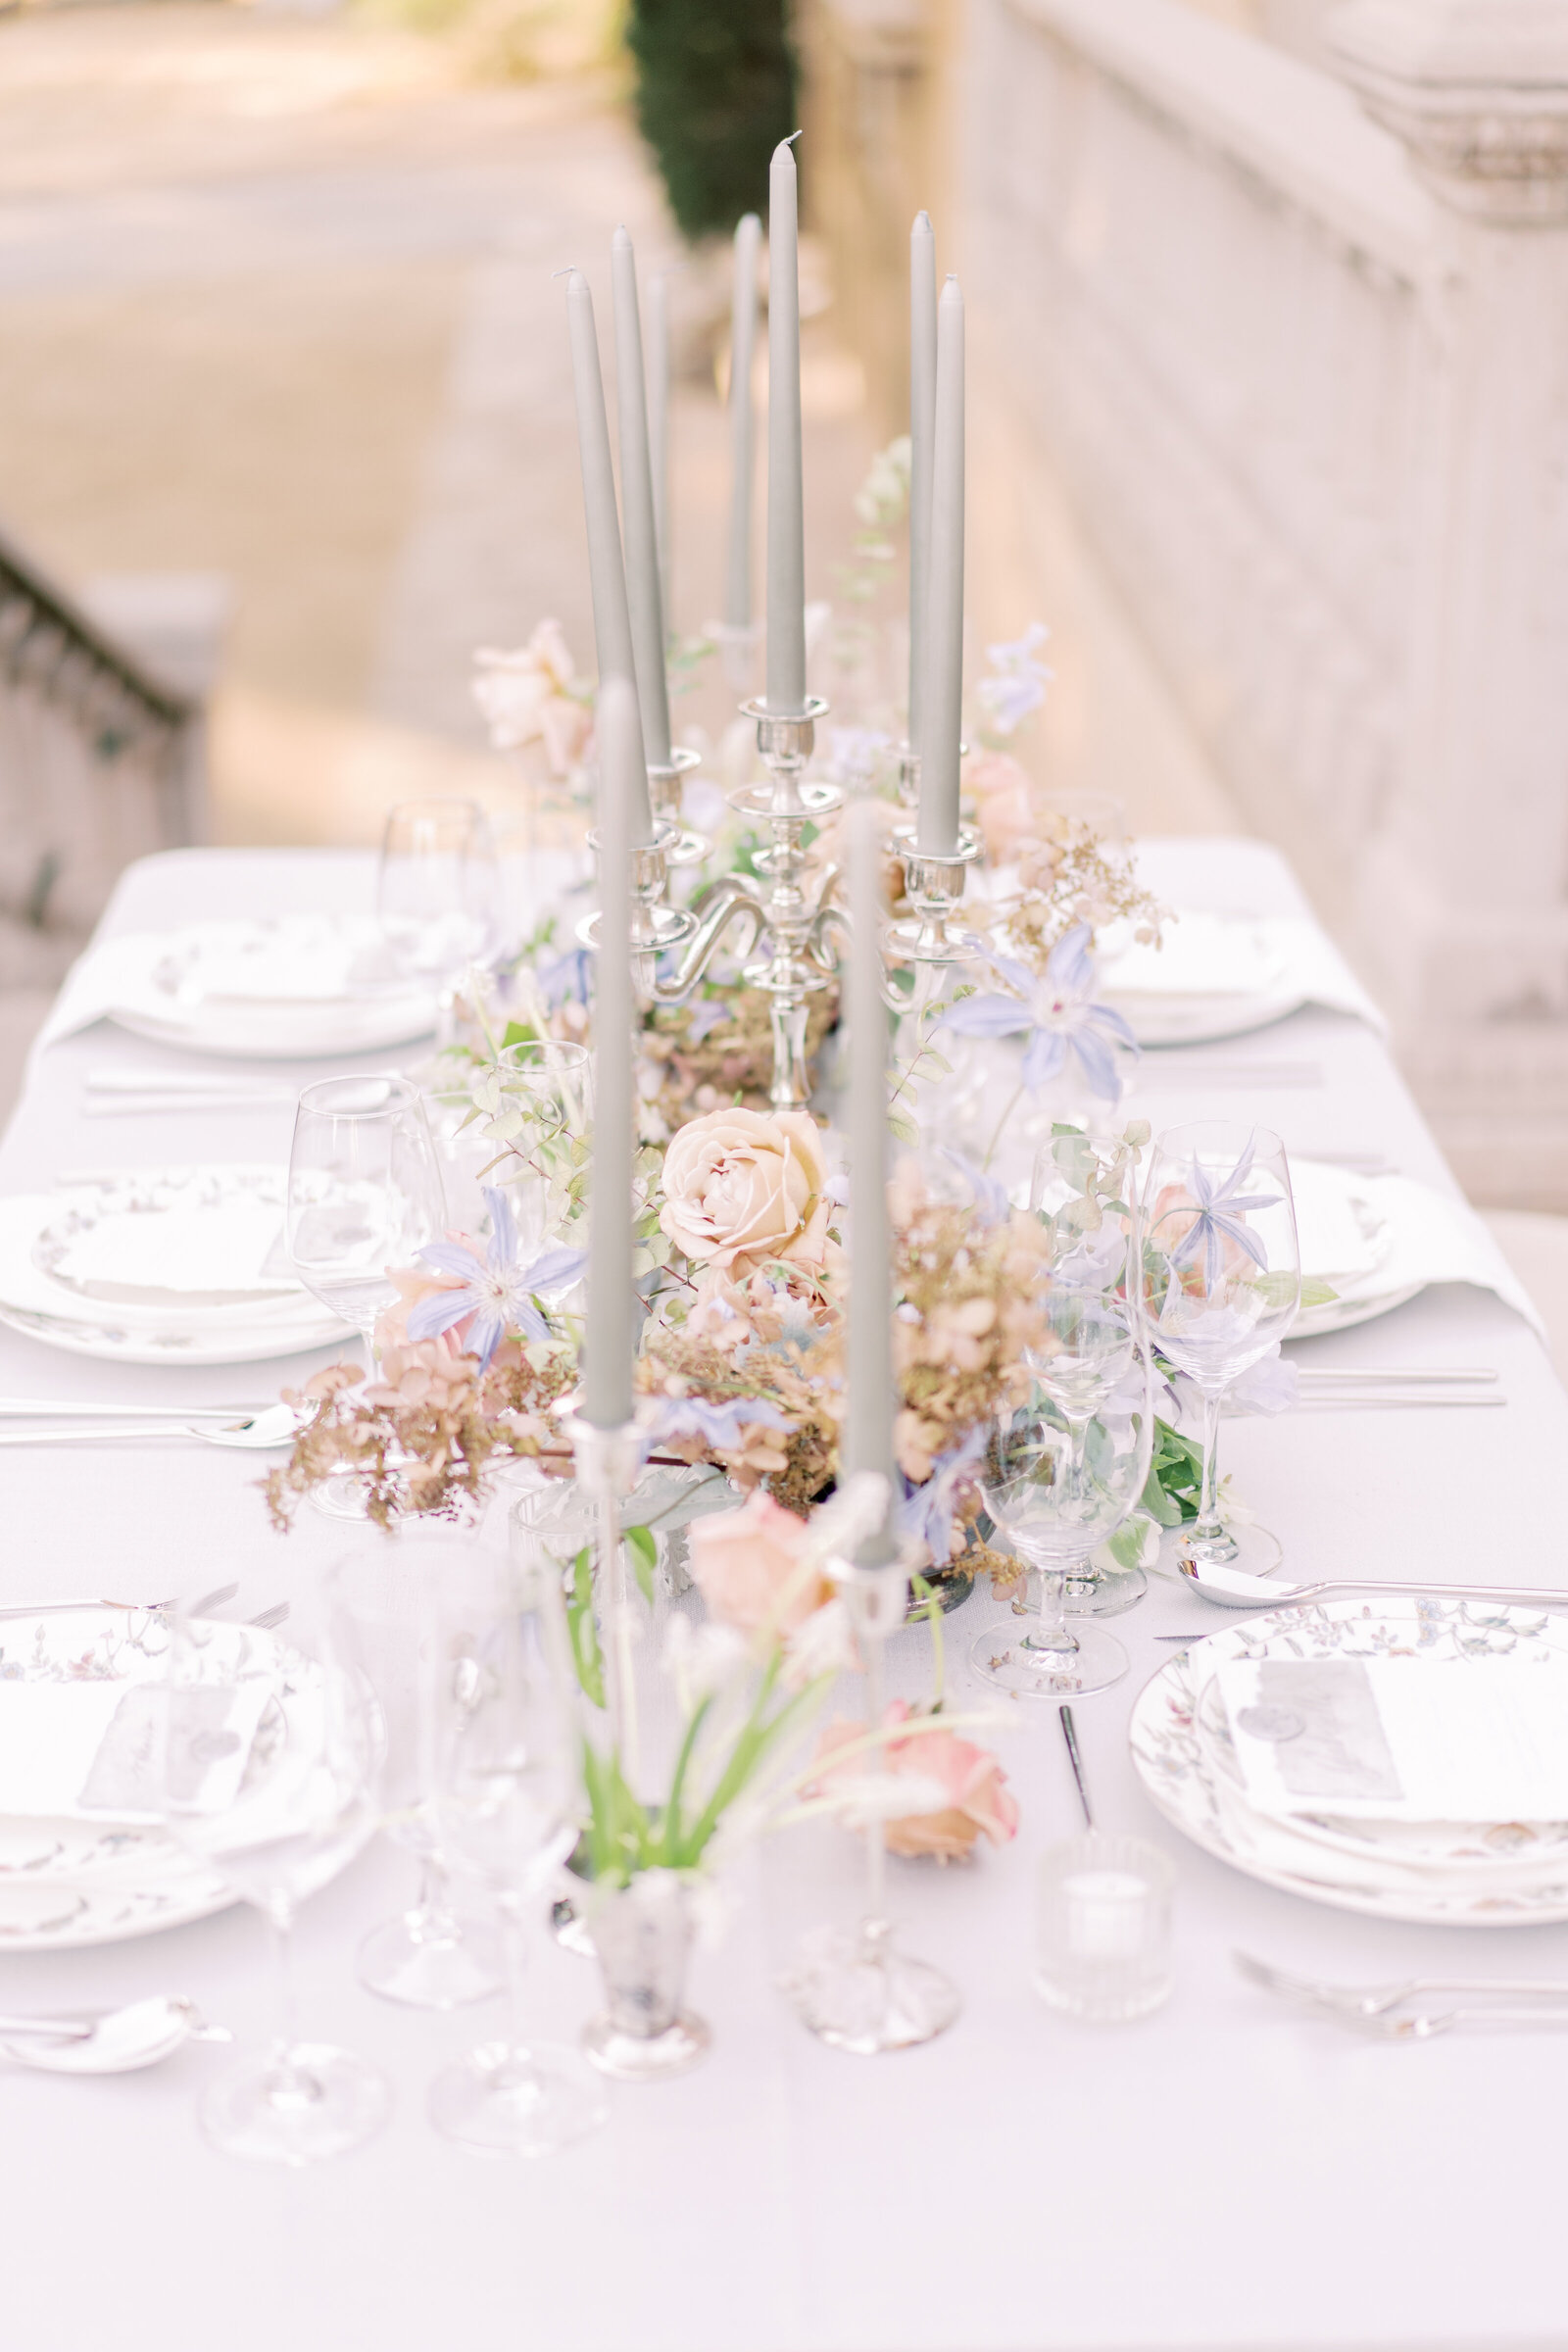 White floral plates, clear glasses, candlesticks, and flowers atop a table with lavender linen outdoors.